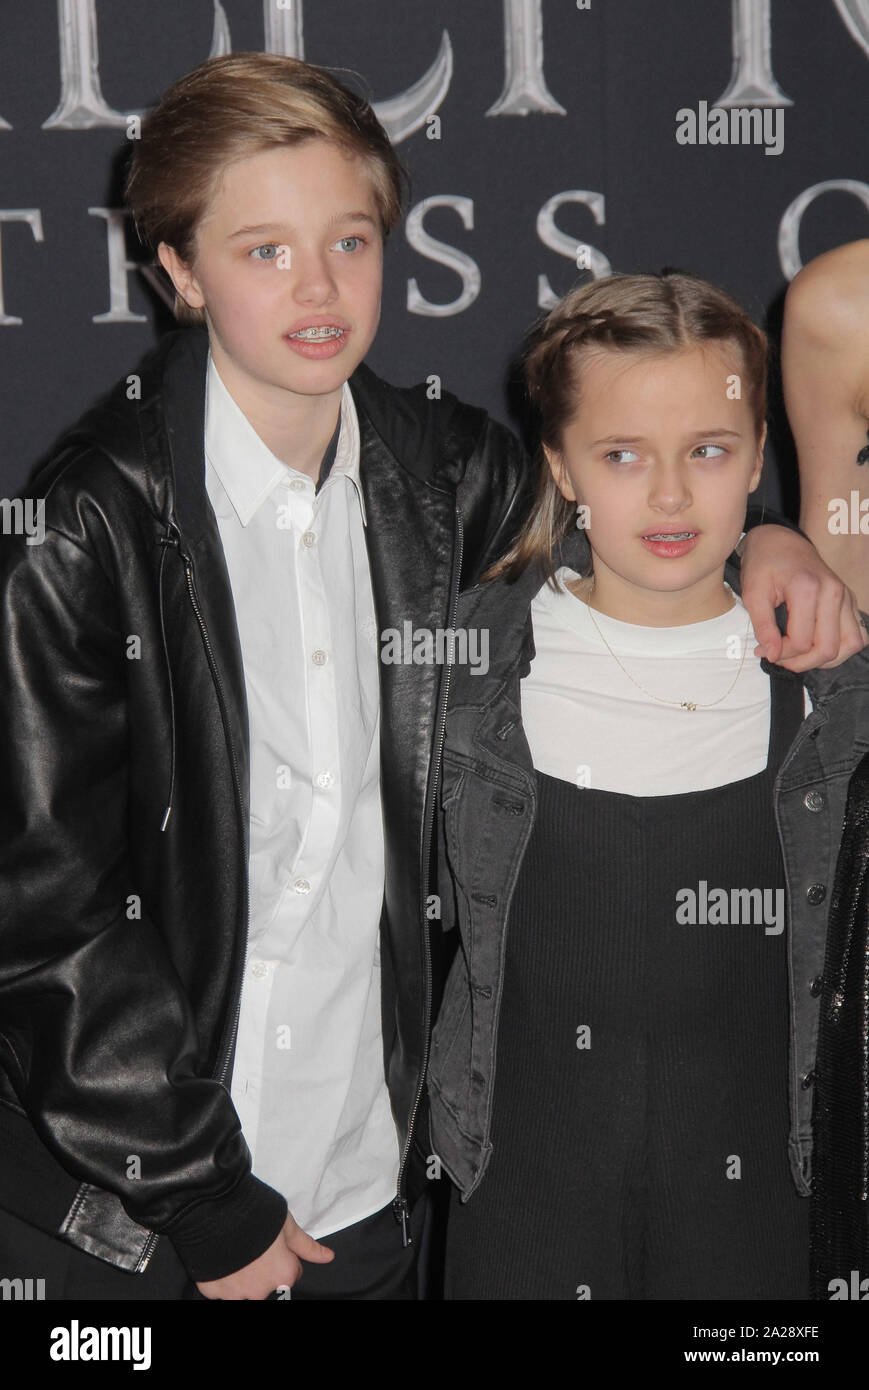 Shiloh Nouvel Jolie-Pitt, Vivienne Marcheline Jolie-Pitt  09/30/2019 The World Premiere of 'Maleficent: Mistress of Evil' held at the El CapitanTheatre in Los Angeles, CA. Photo by I. Hasegawa / HNW/PictureLux Stock Photo